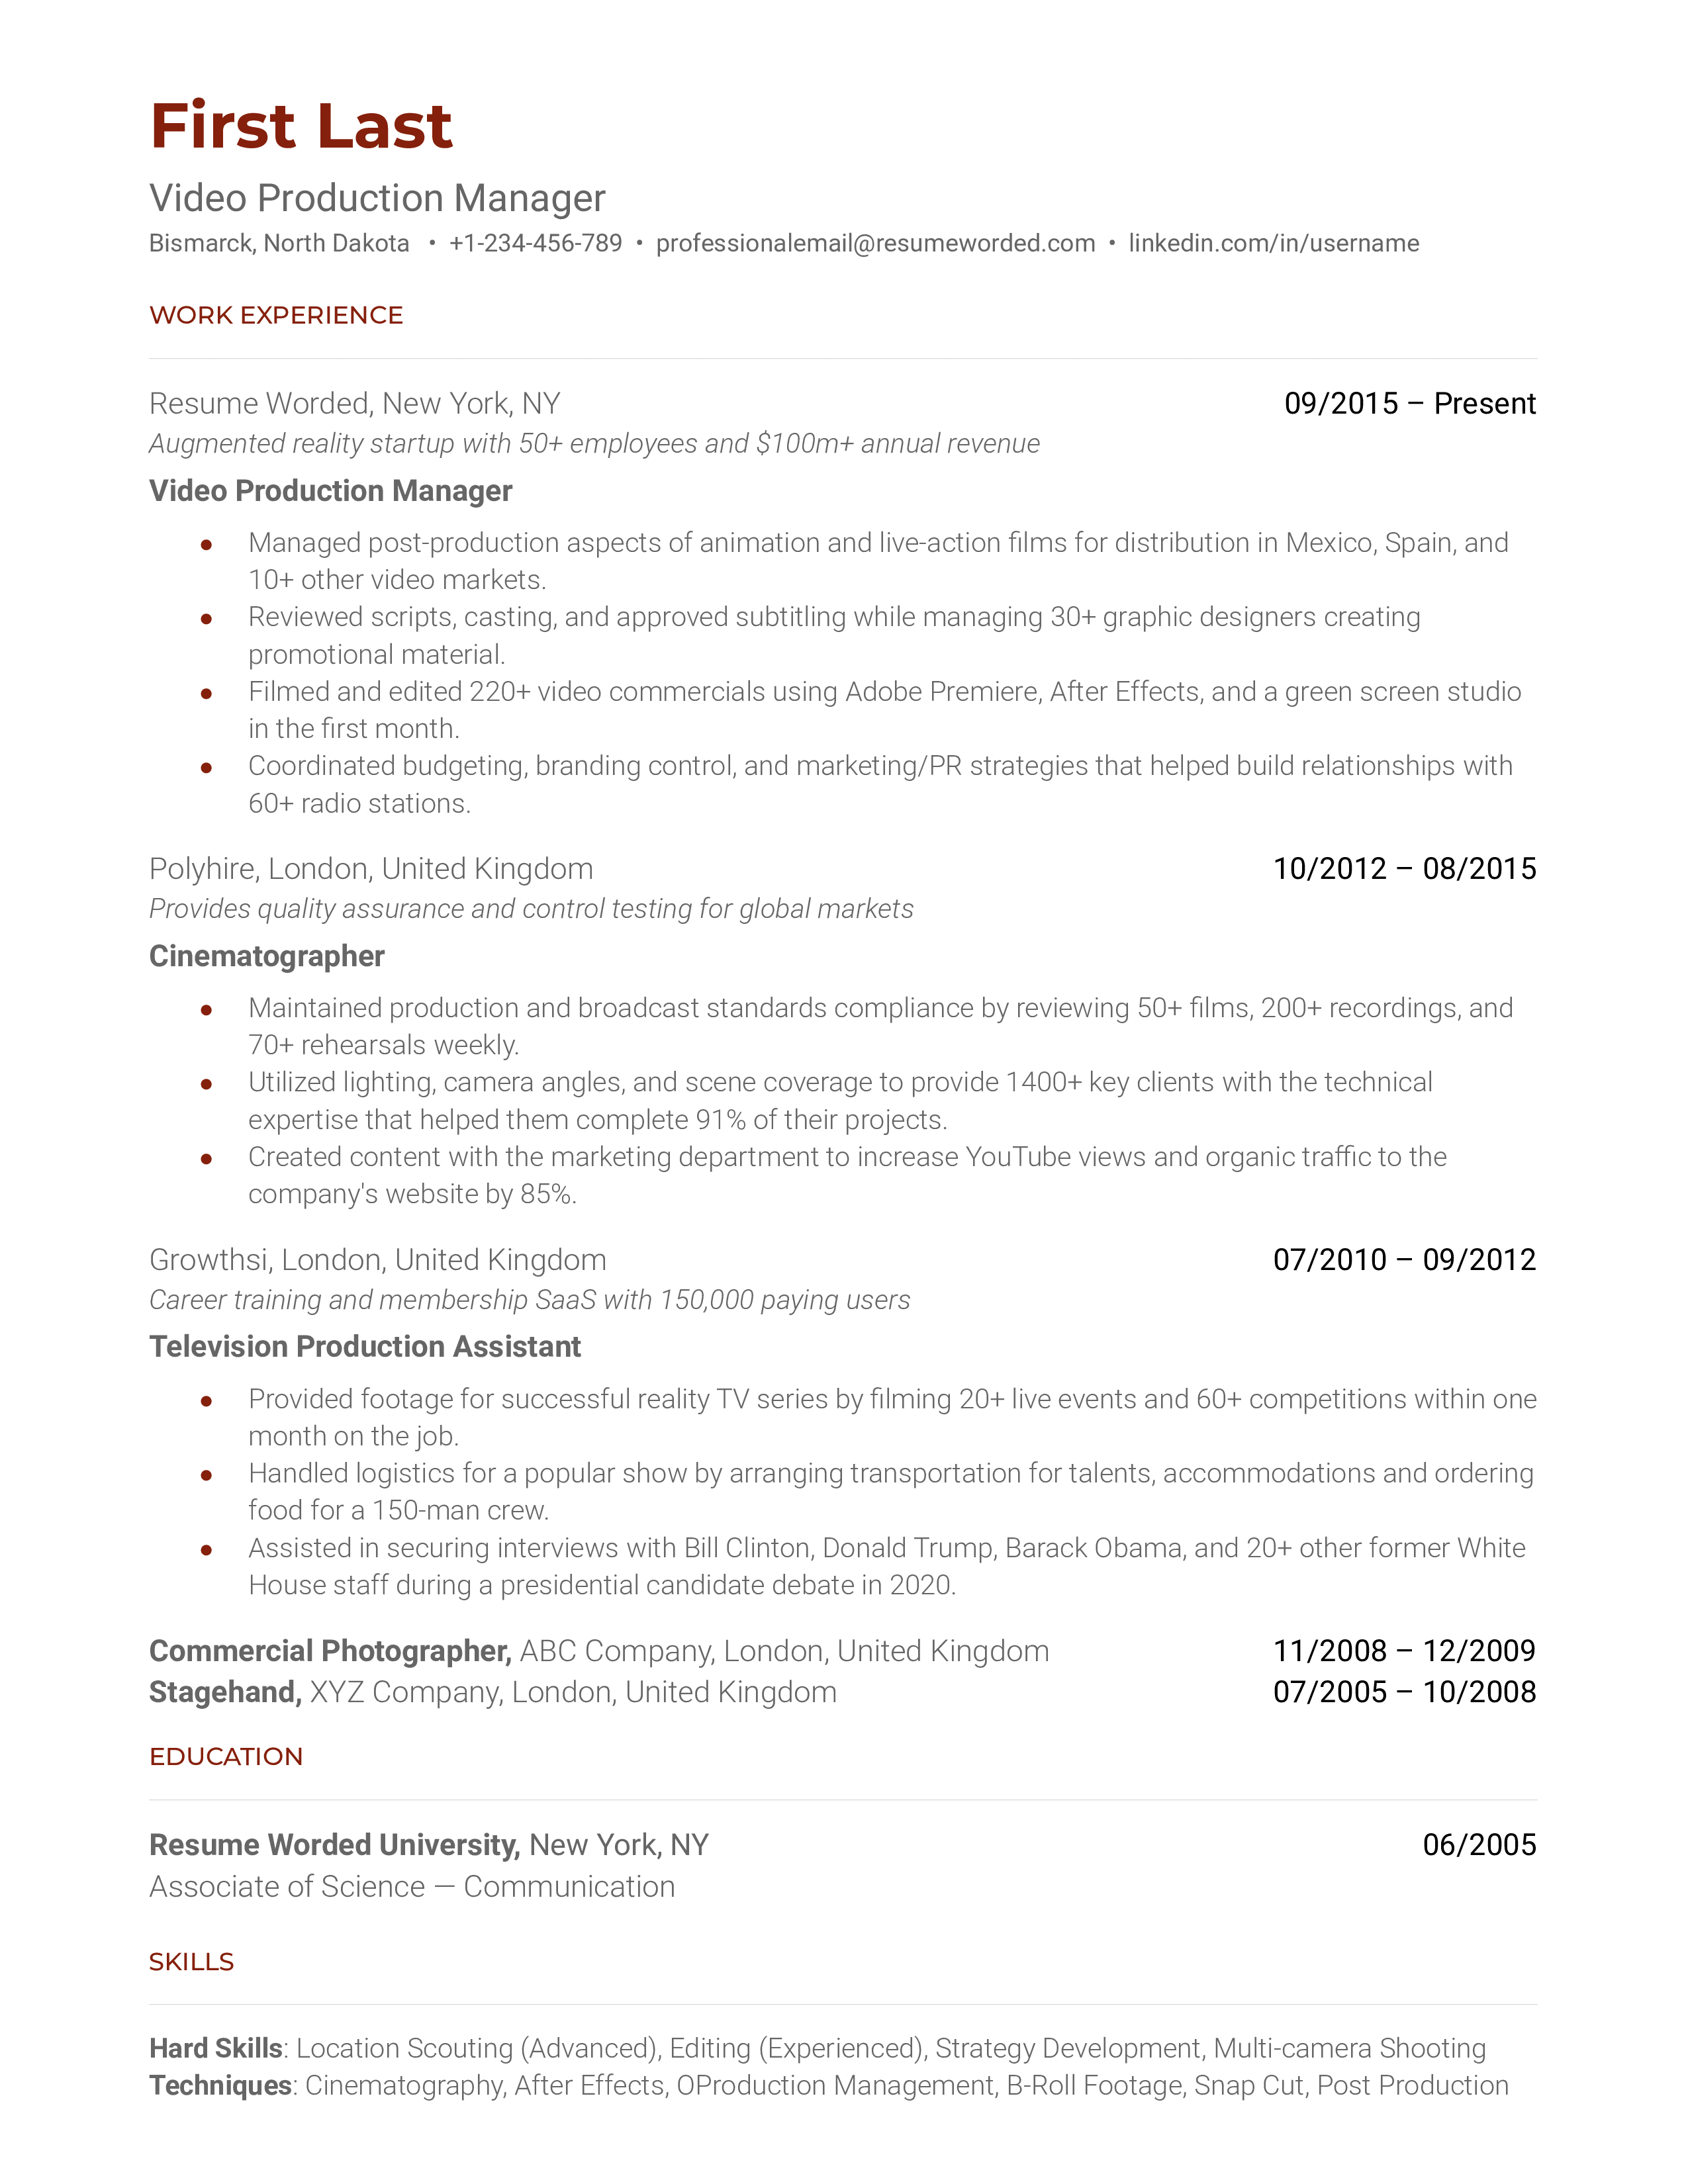 A well-crafted CV for a Video Production Manager position.